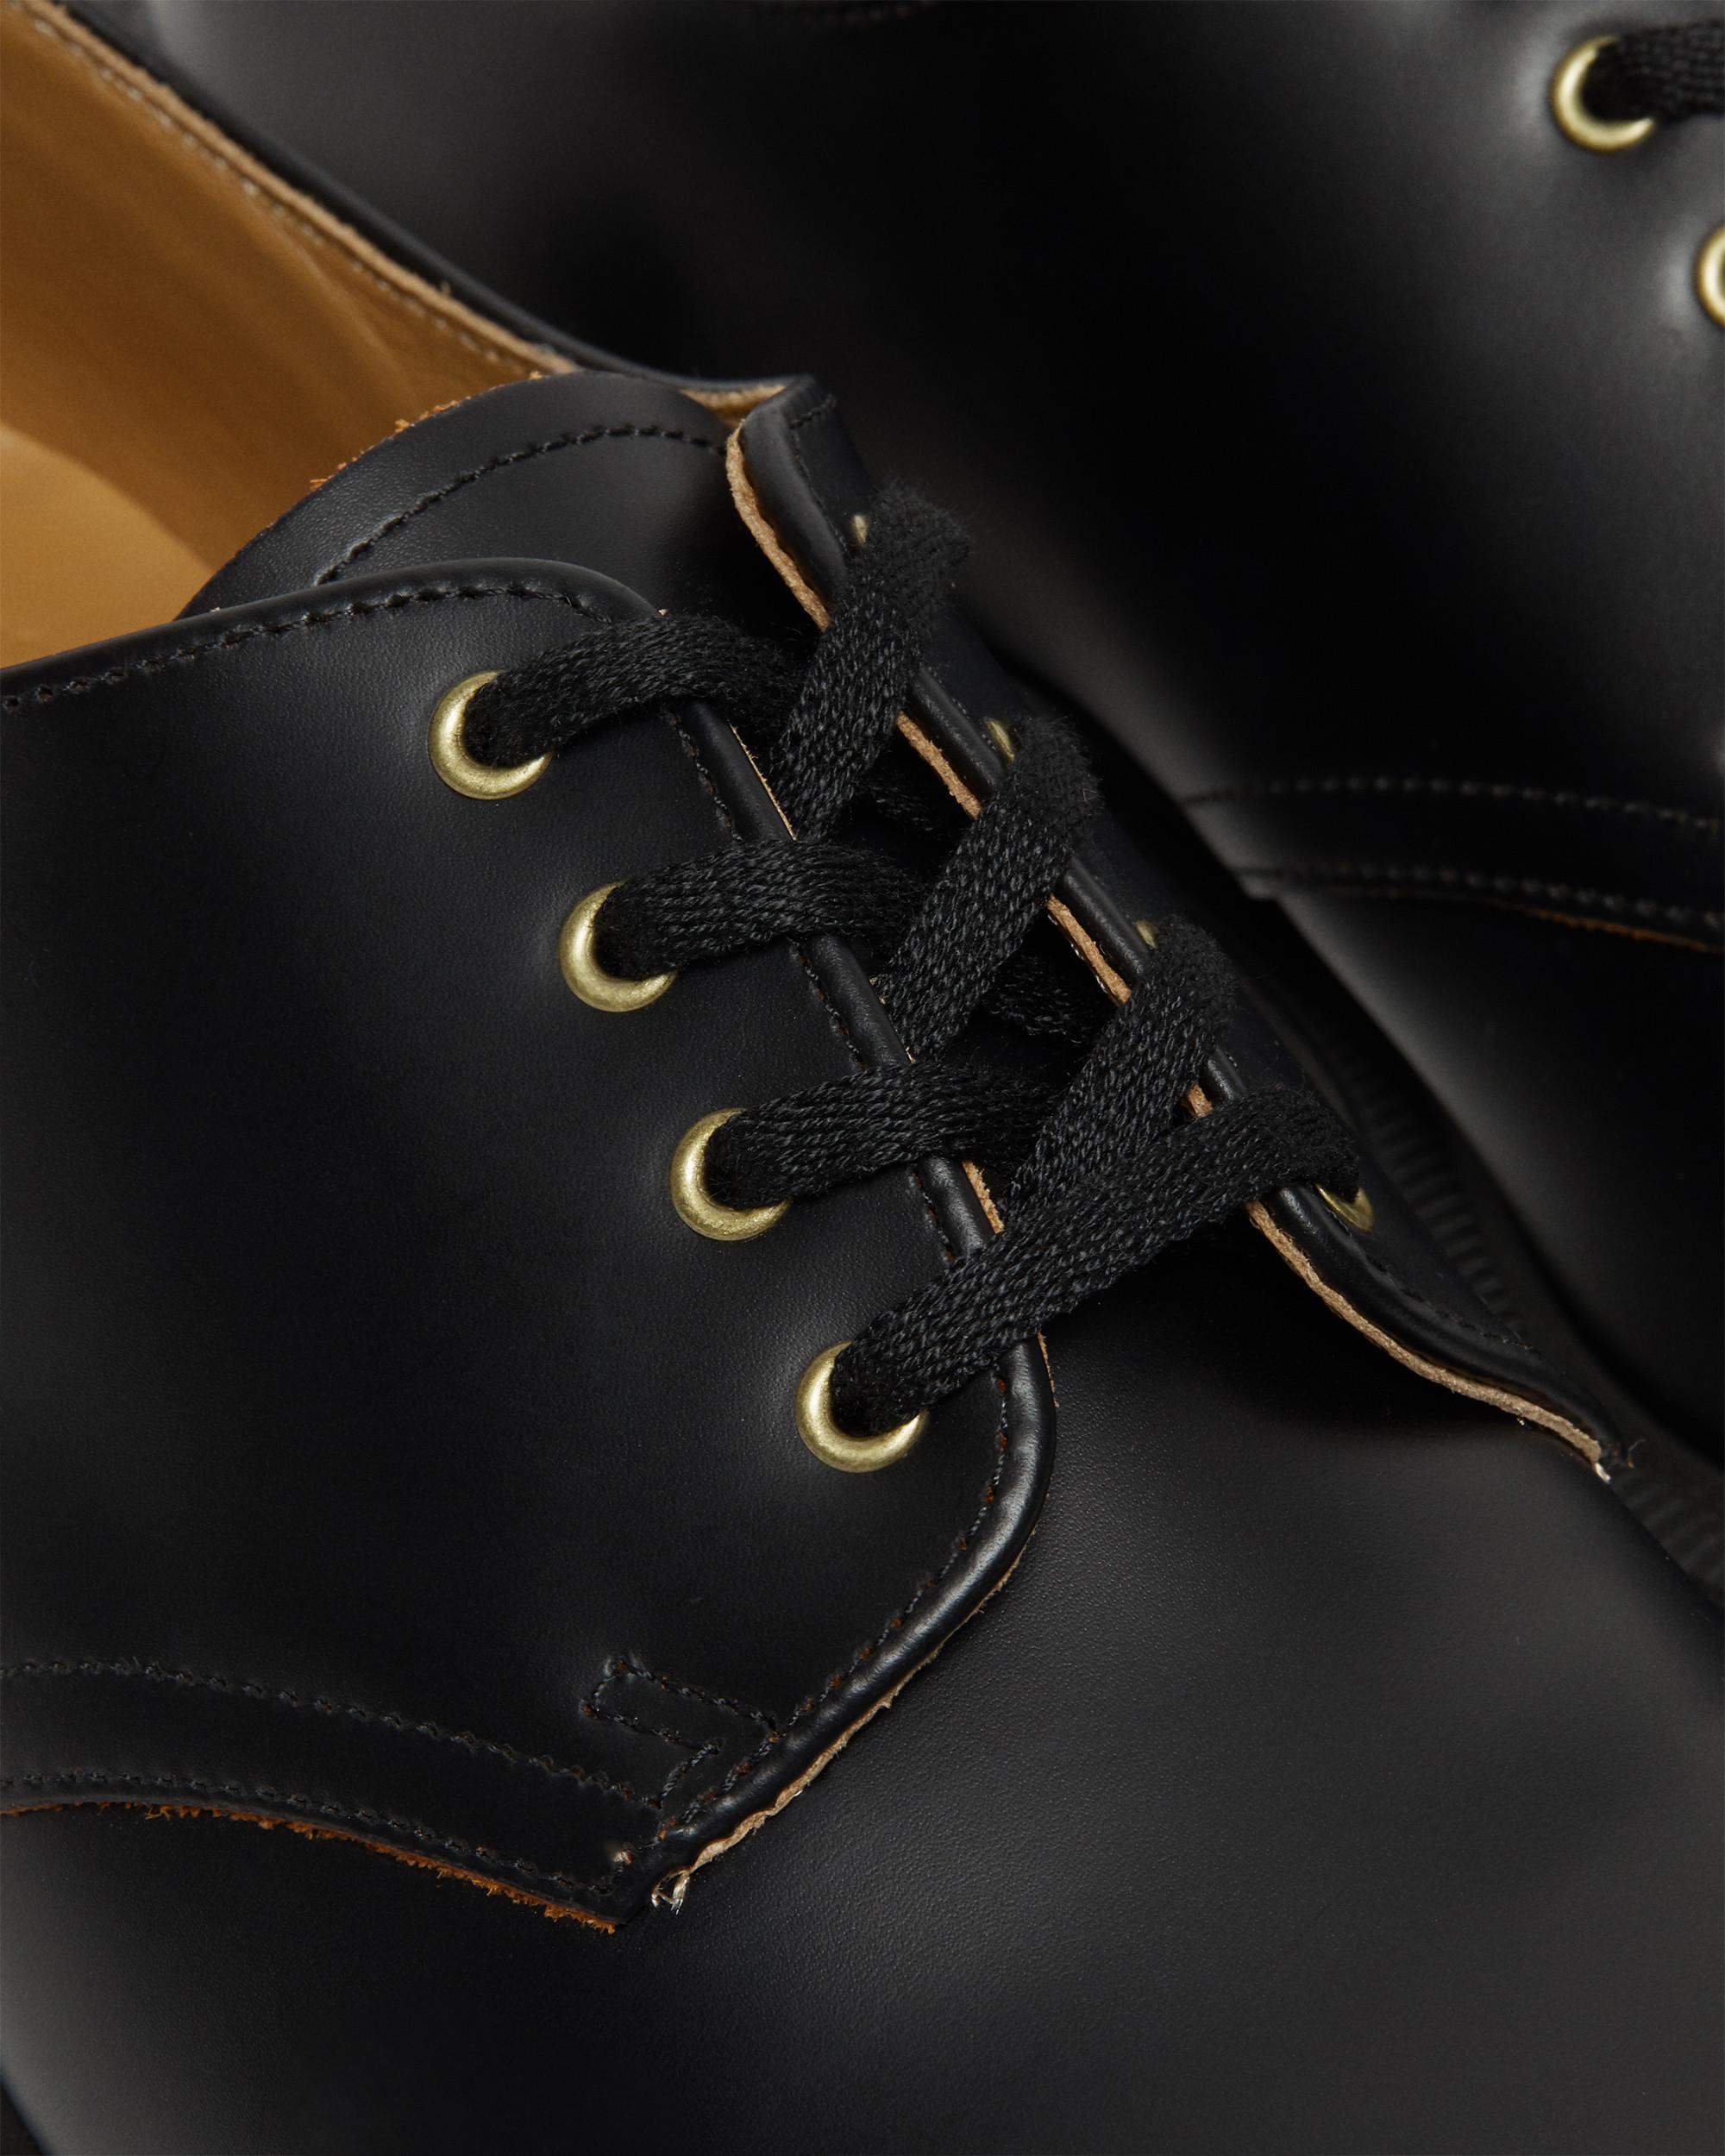 Smiths Archive Lace Up Shoes in Black | Dr. Martens